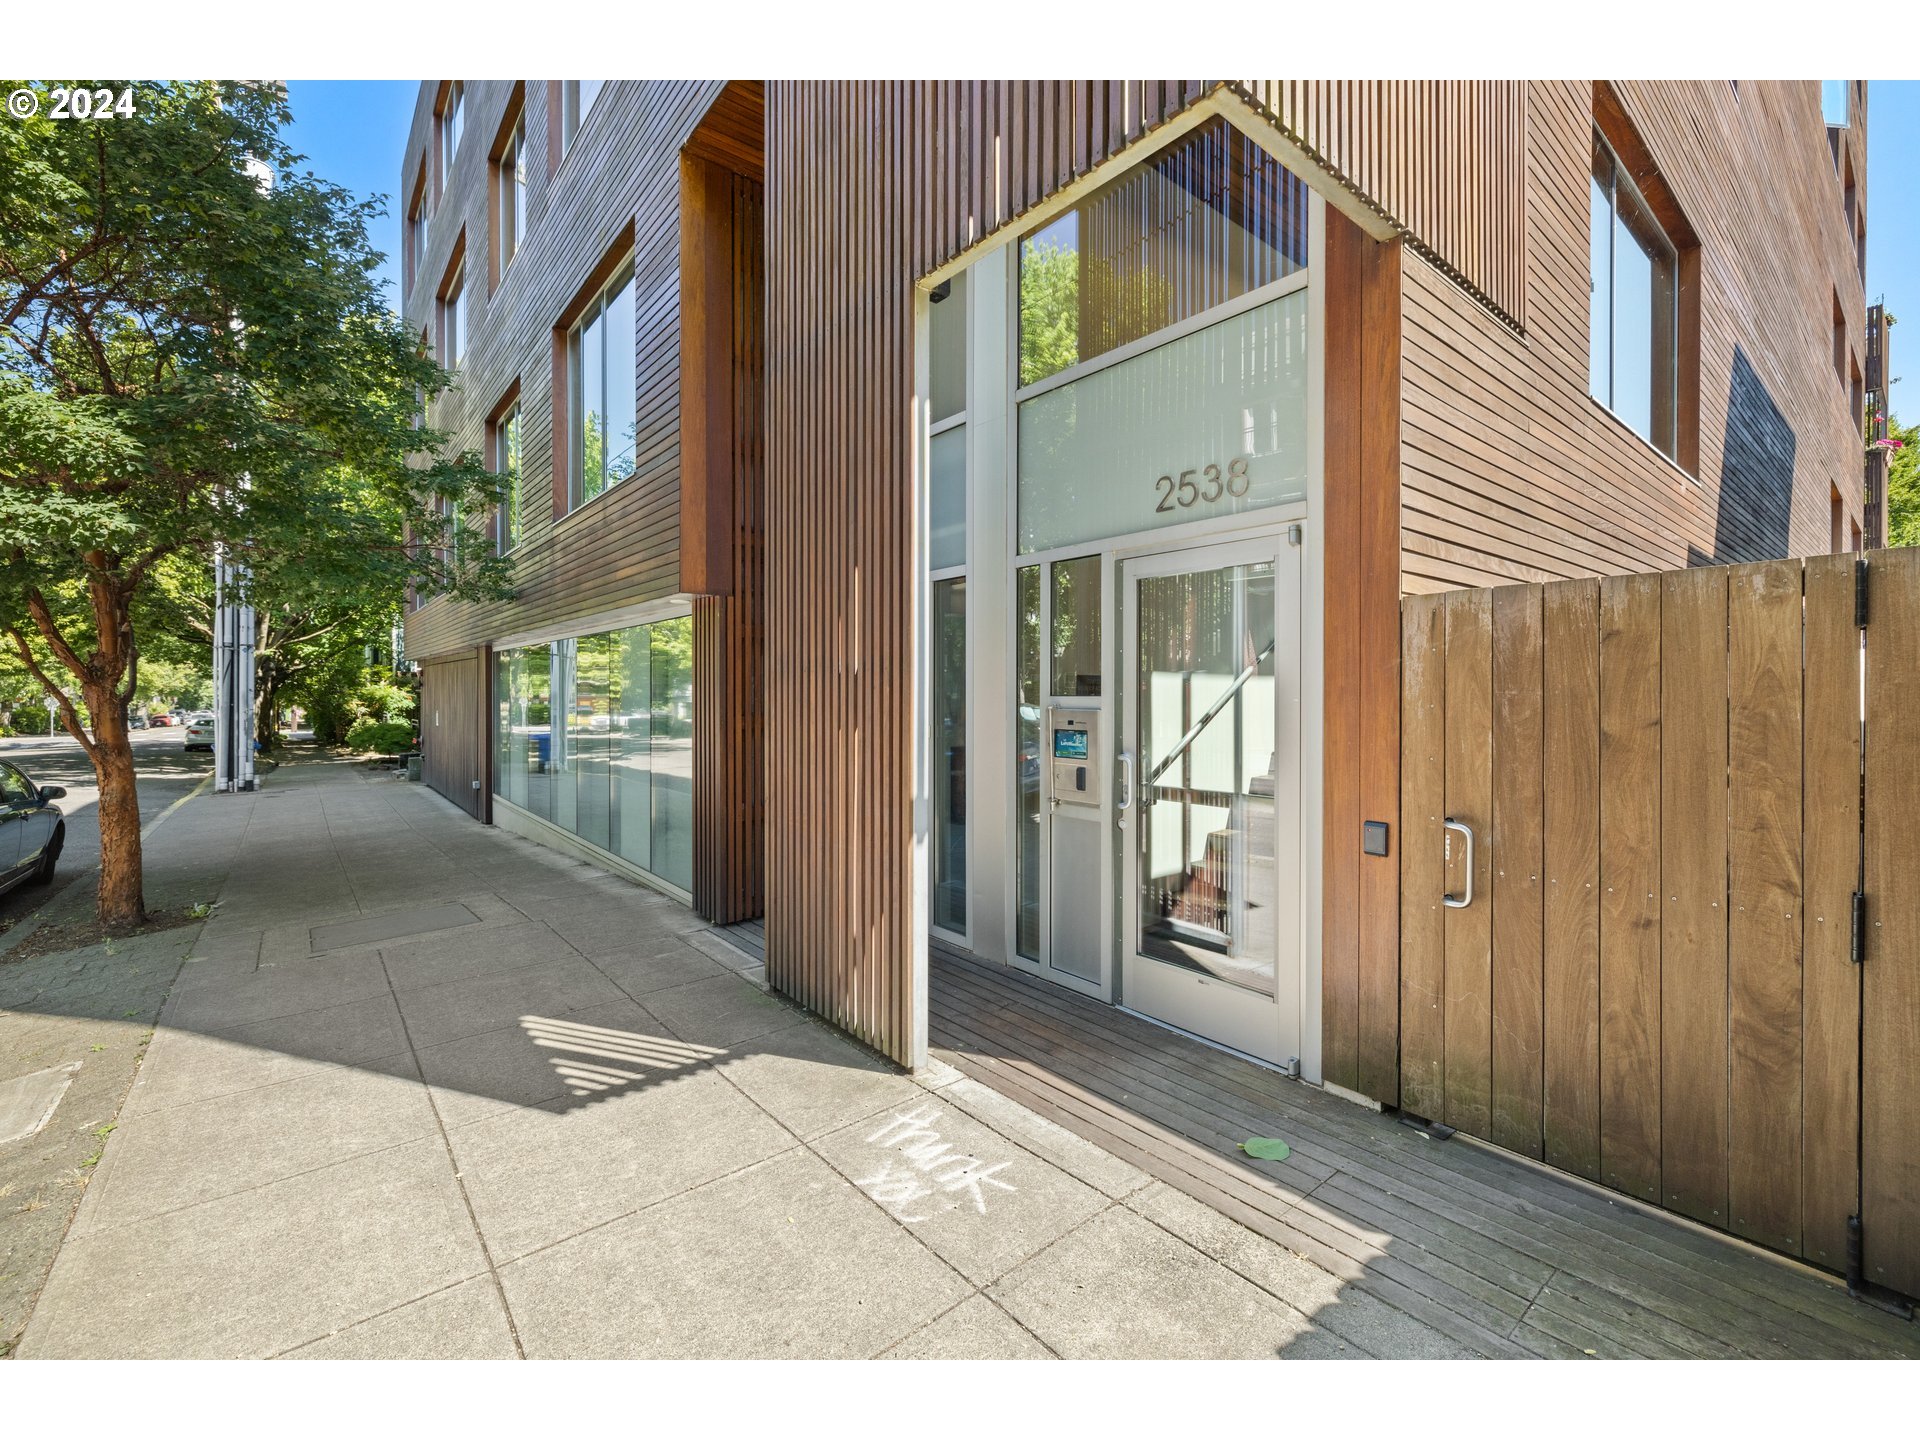 Condos, Lofts and Townhomes for Sale in Portland Lofts